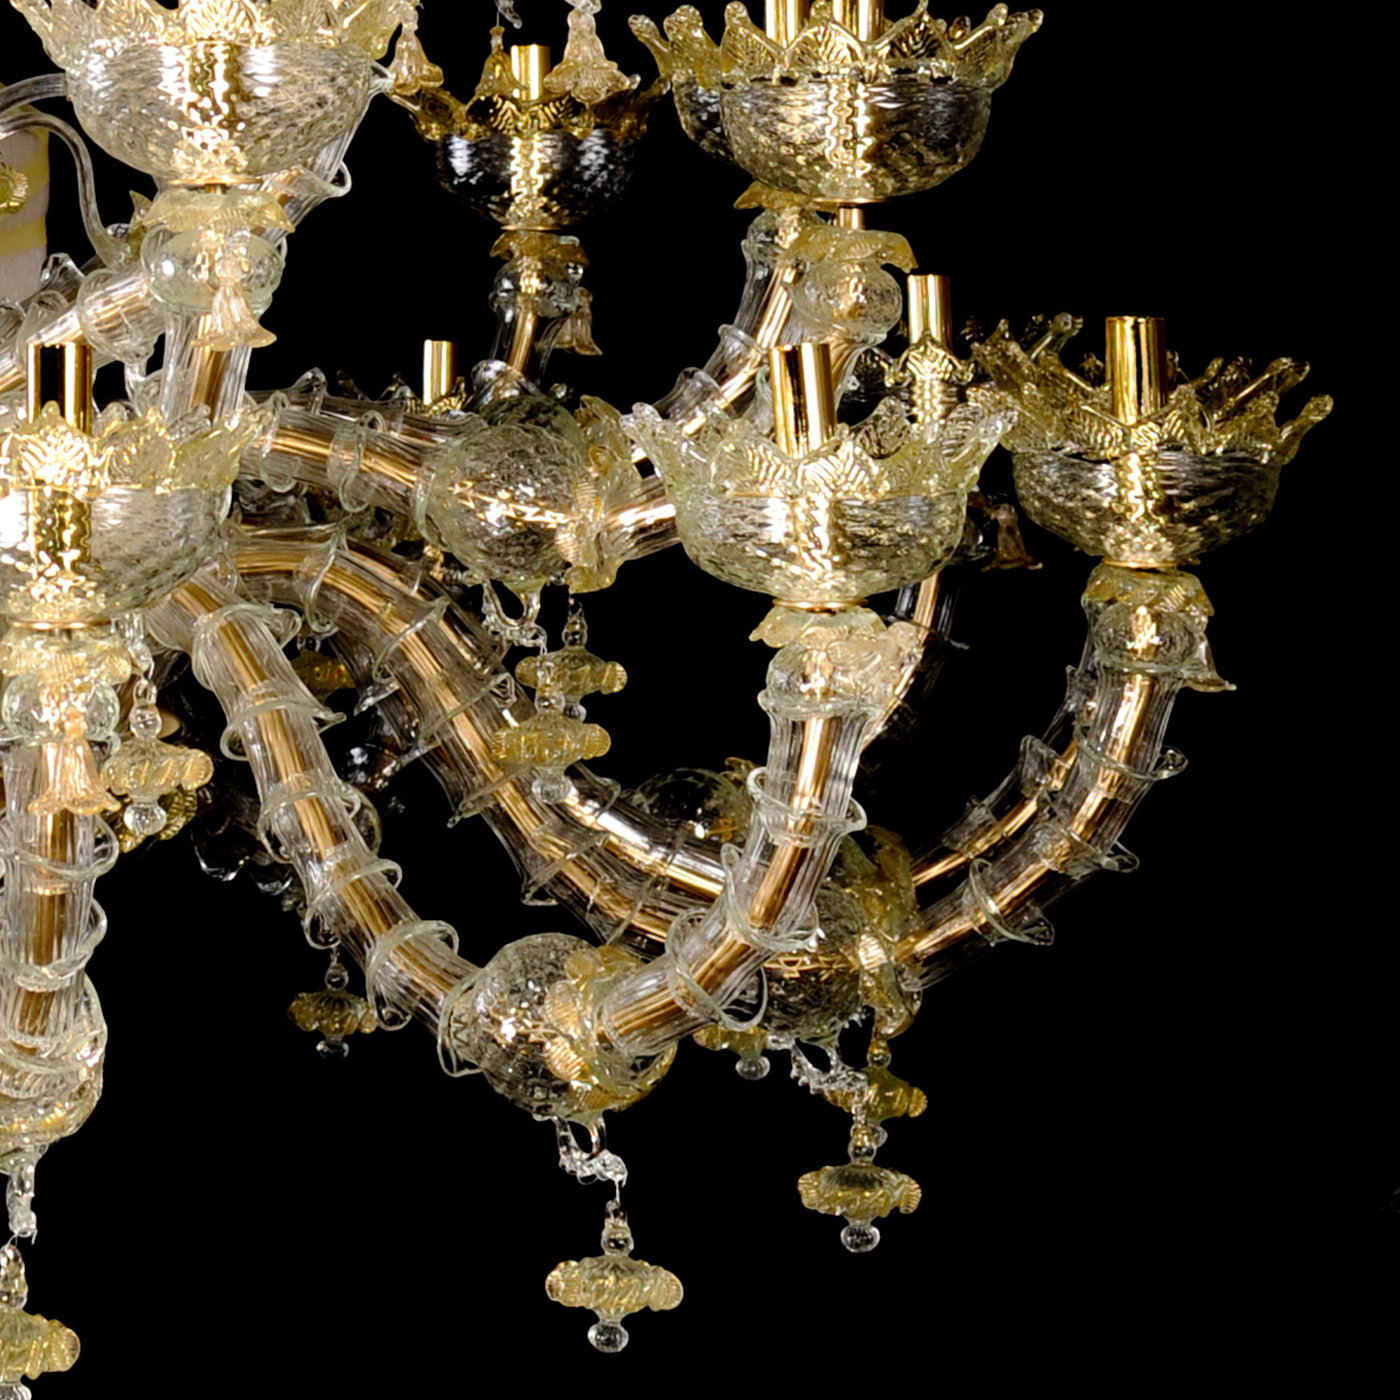 Rezzonico-style Gold and Crystal Chandelier #7 - Alternative view 4